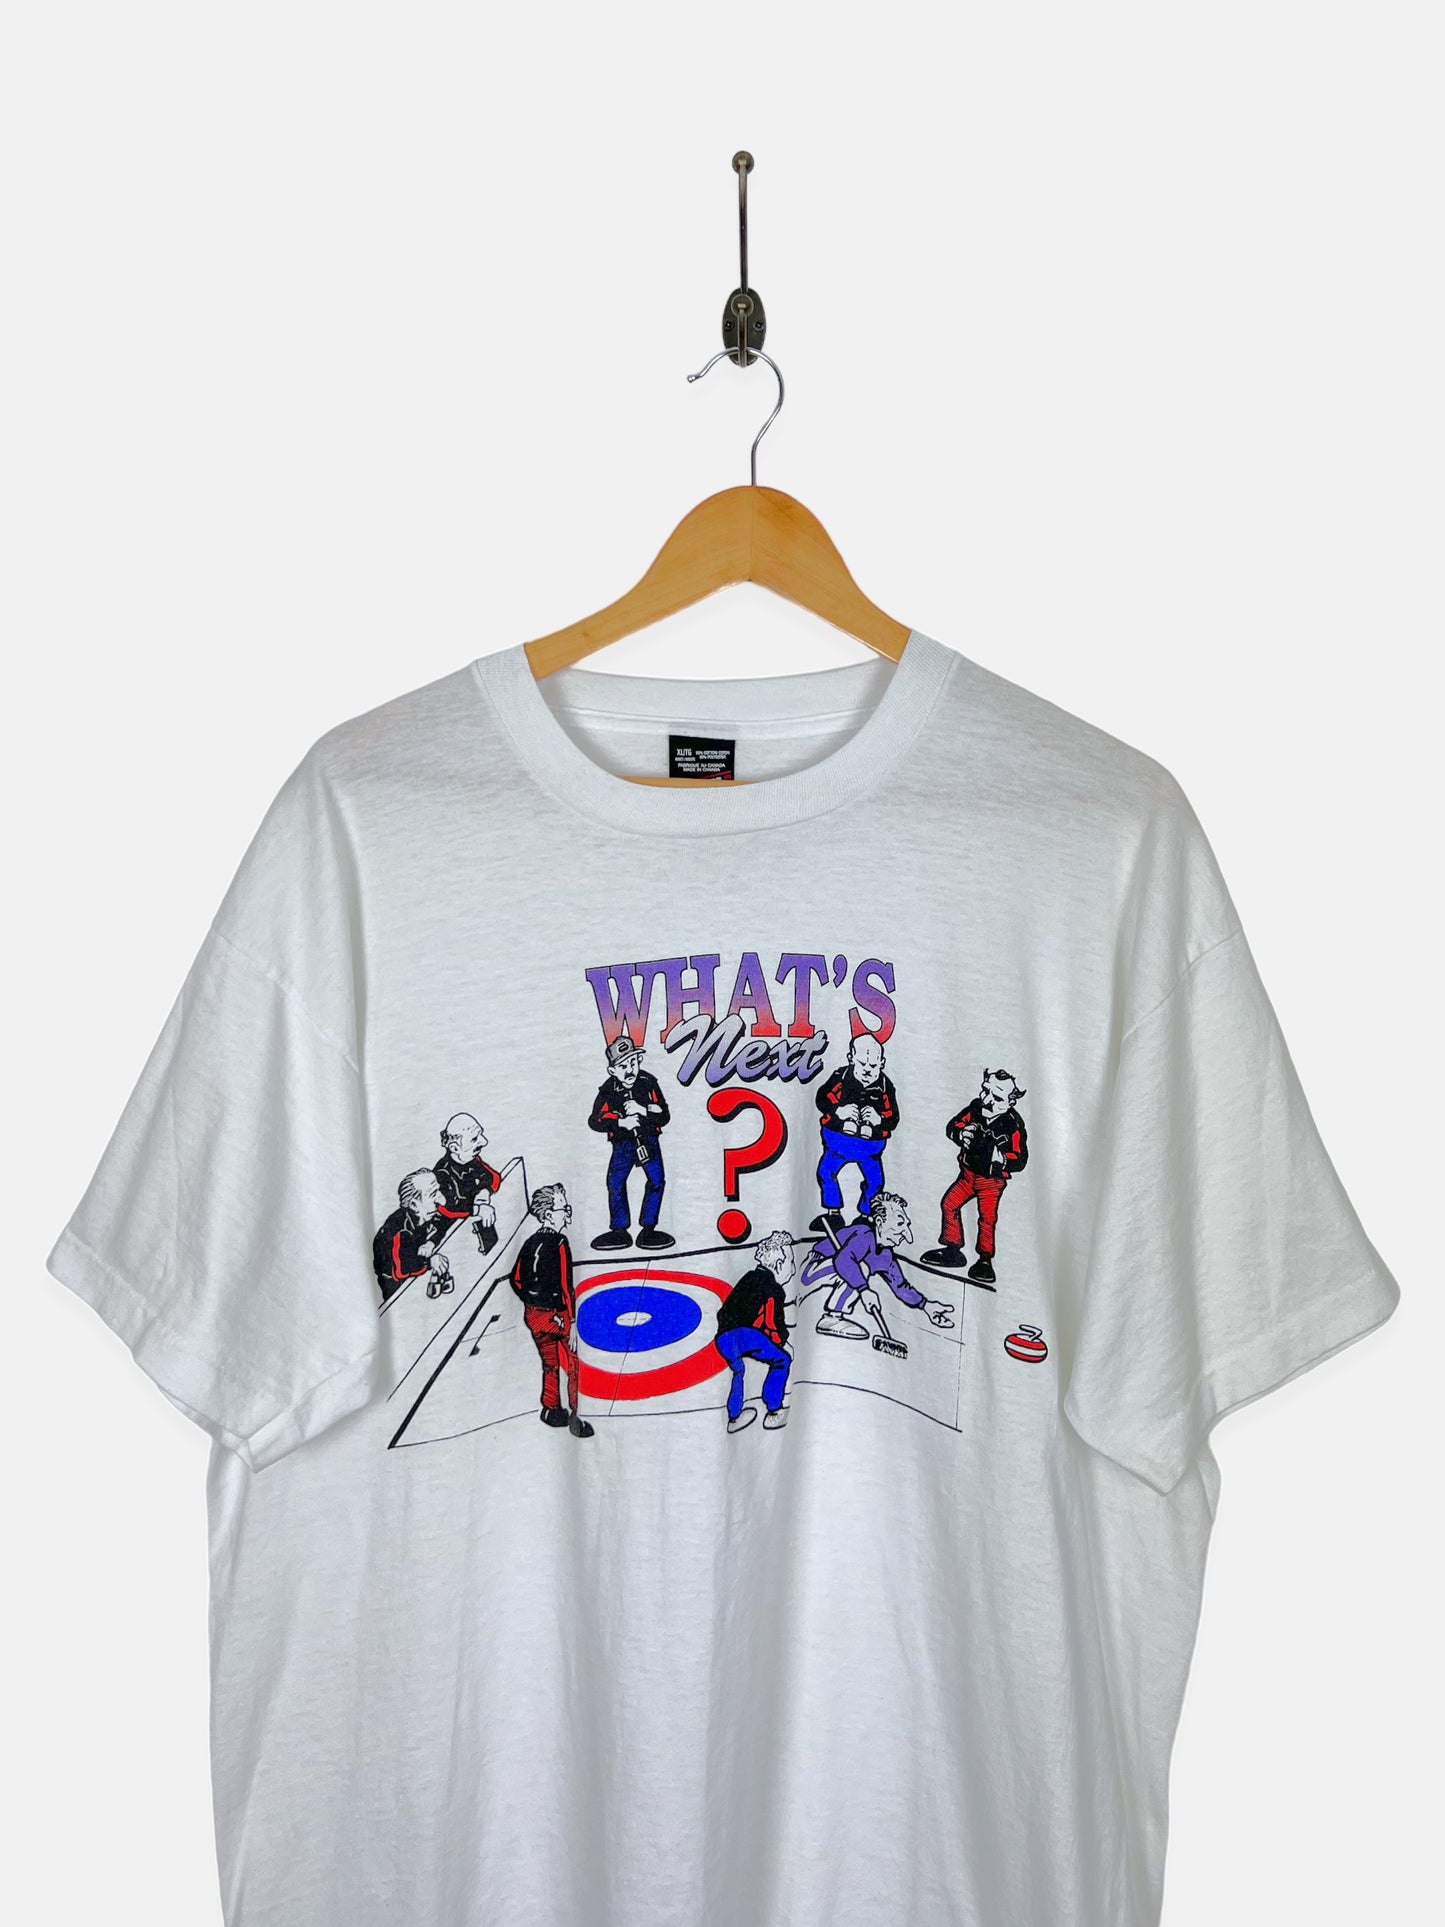 90's What's Next USA Made Vintage T-Shirt Size M